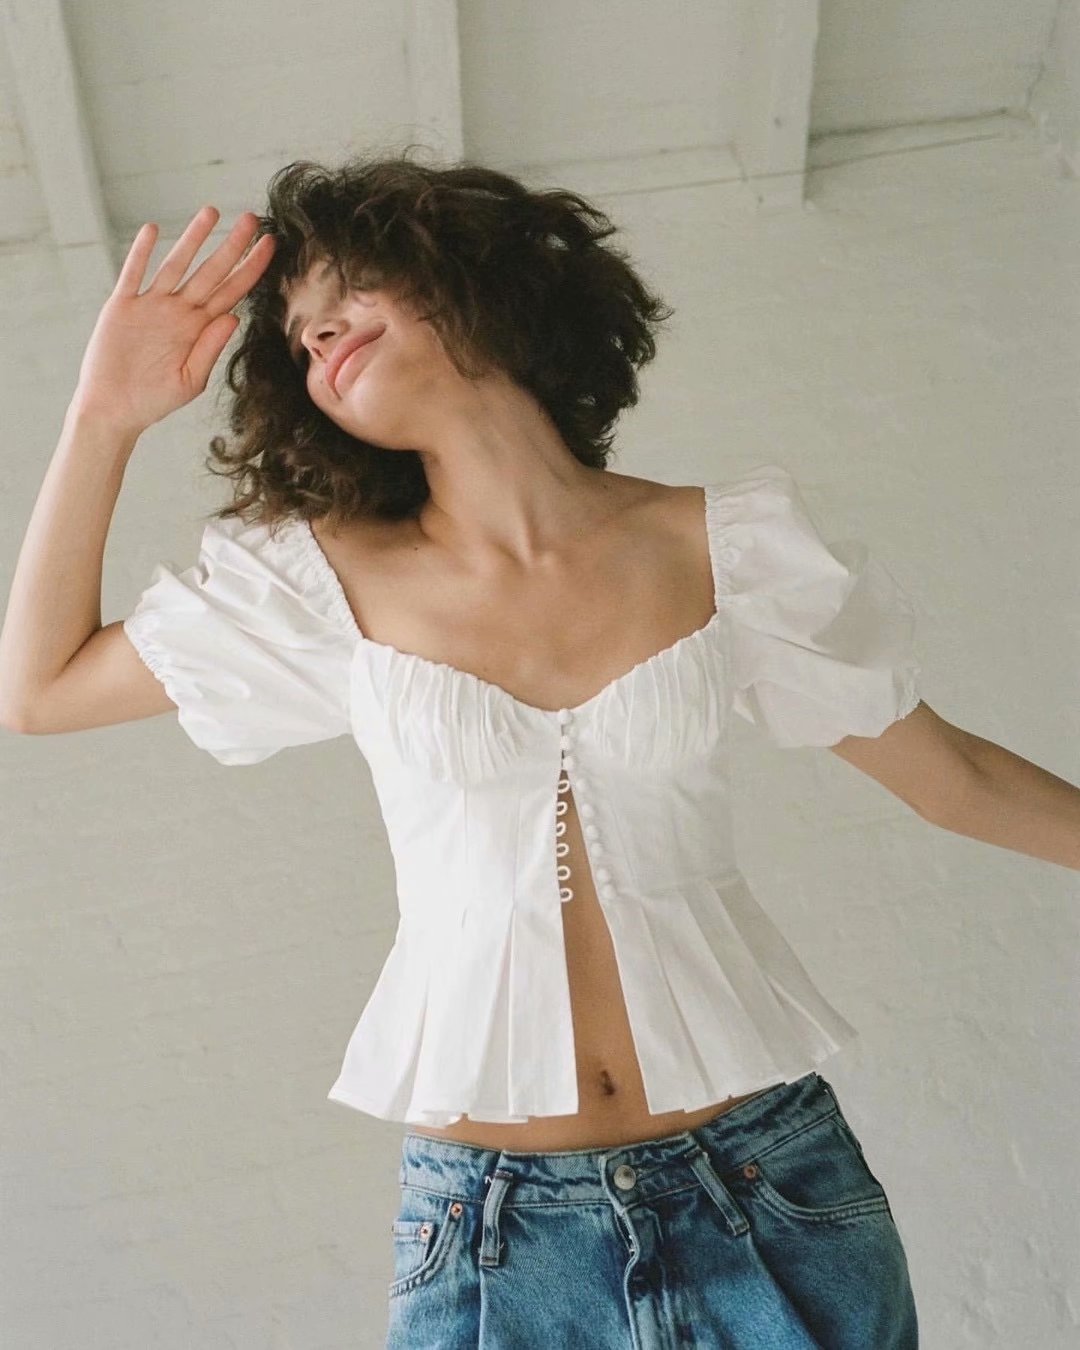 OOTDGIRL Chic Fashion Square Collar Lace Up Top White Cotton For Women Summer Crop Top Elegant Tank Top Vintage Blouse Blanca Mujer